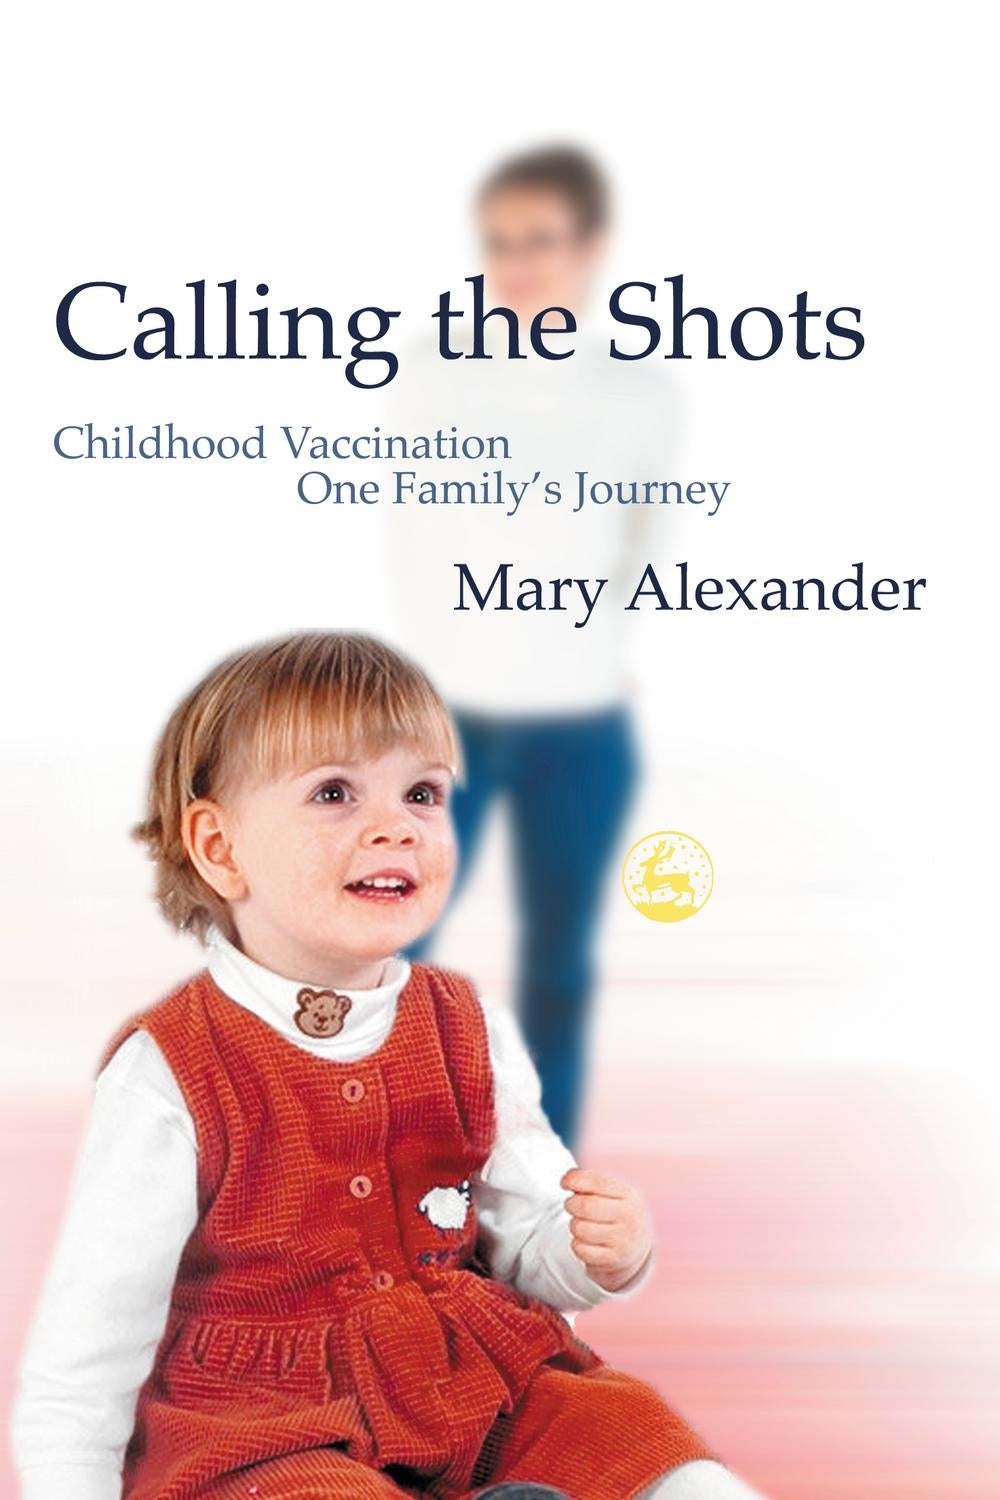 Calling the Shots by Mary Alexander